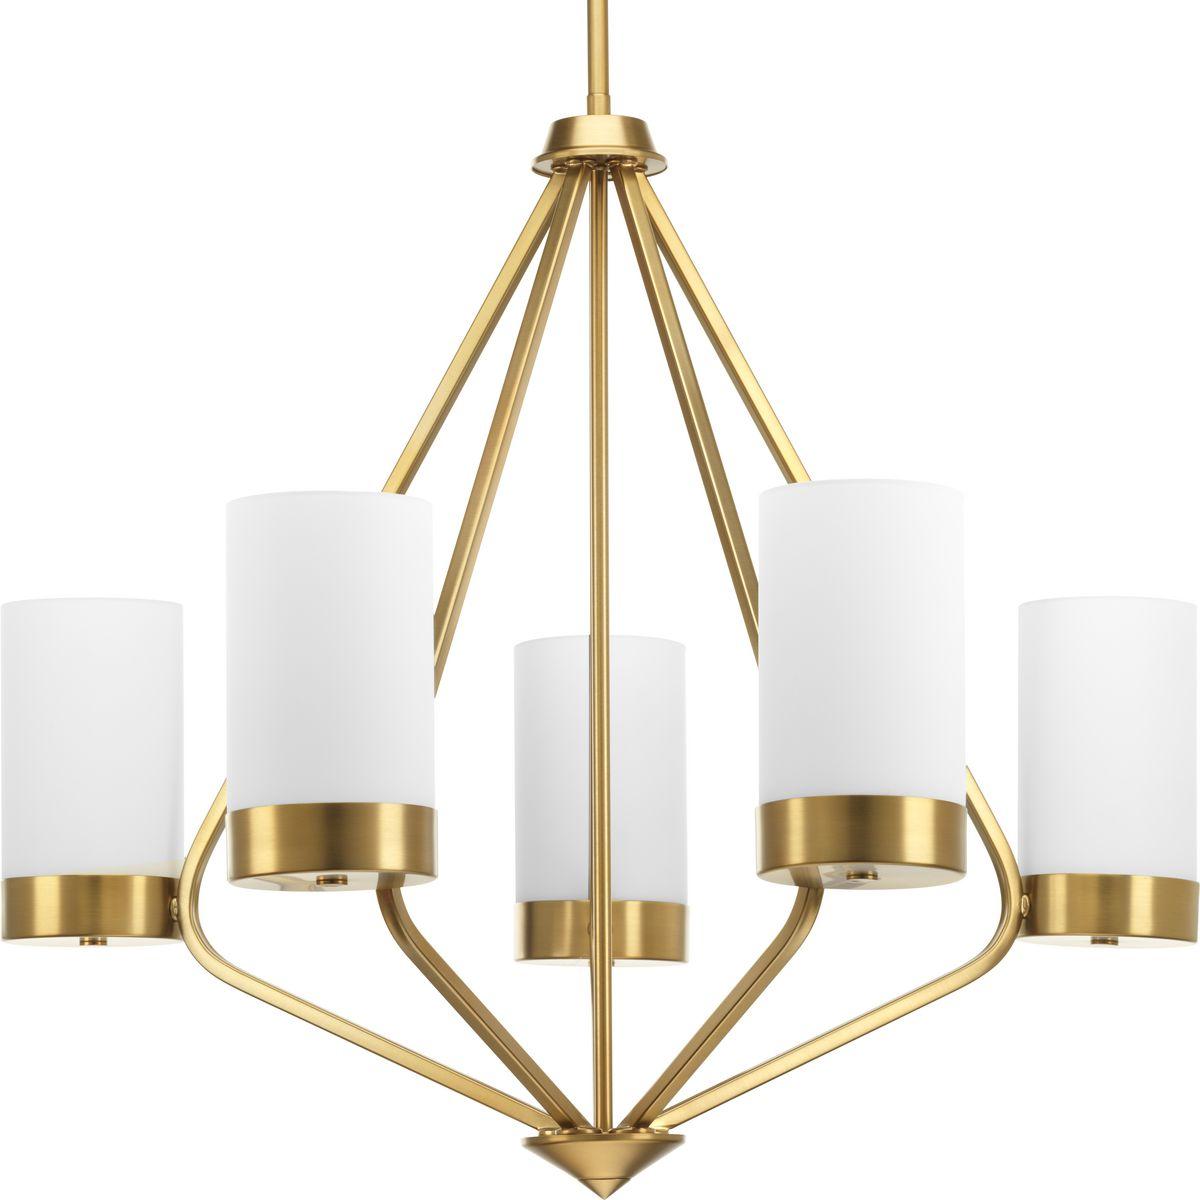 Hubbell P400022-109 Achieve a mid-century modern look with Elevate, which boasts glass shades and a frame inspired by Space Age styling. The trapezoidal form is accentuate in the Brushed Bronze finish. This five-light chandelier is part of our Design Series collections.  ; B